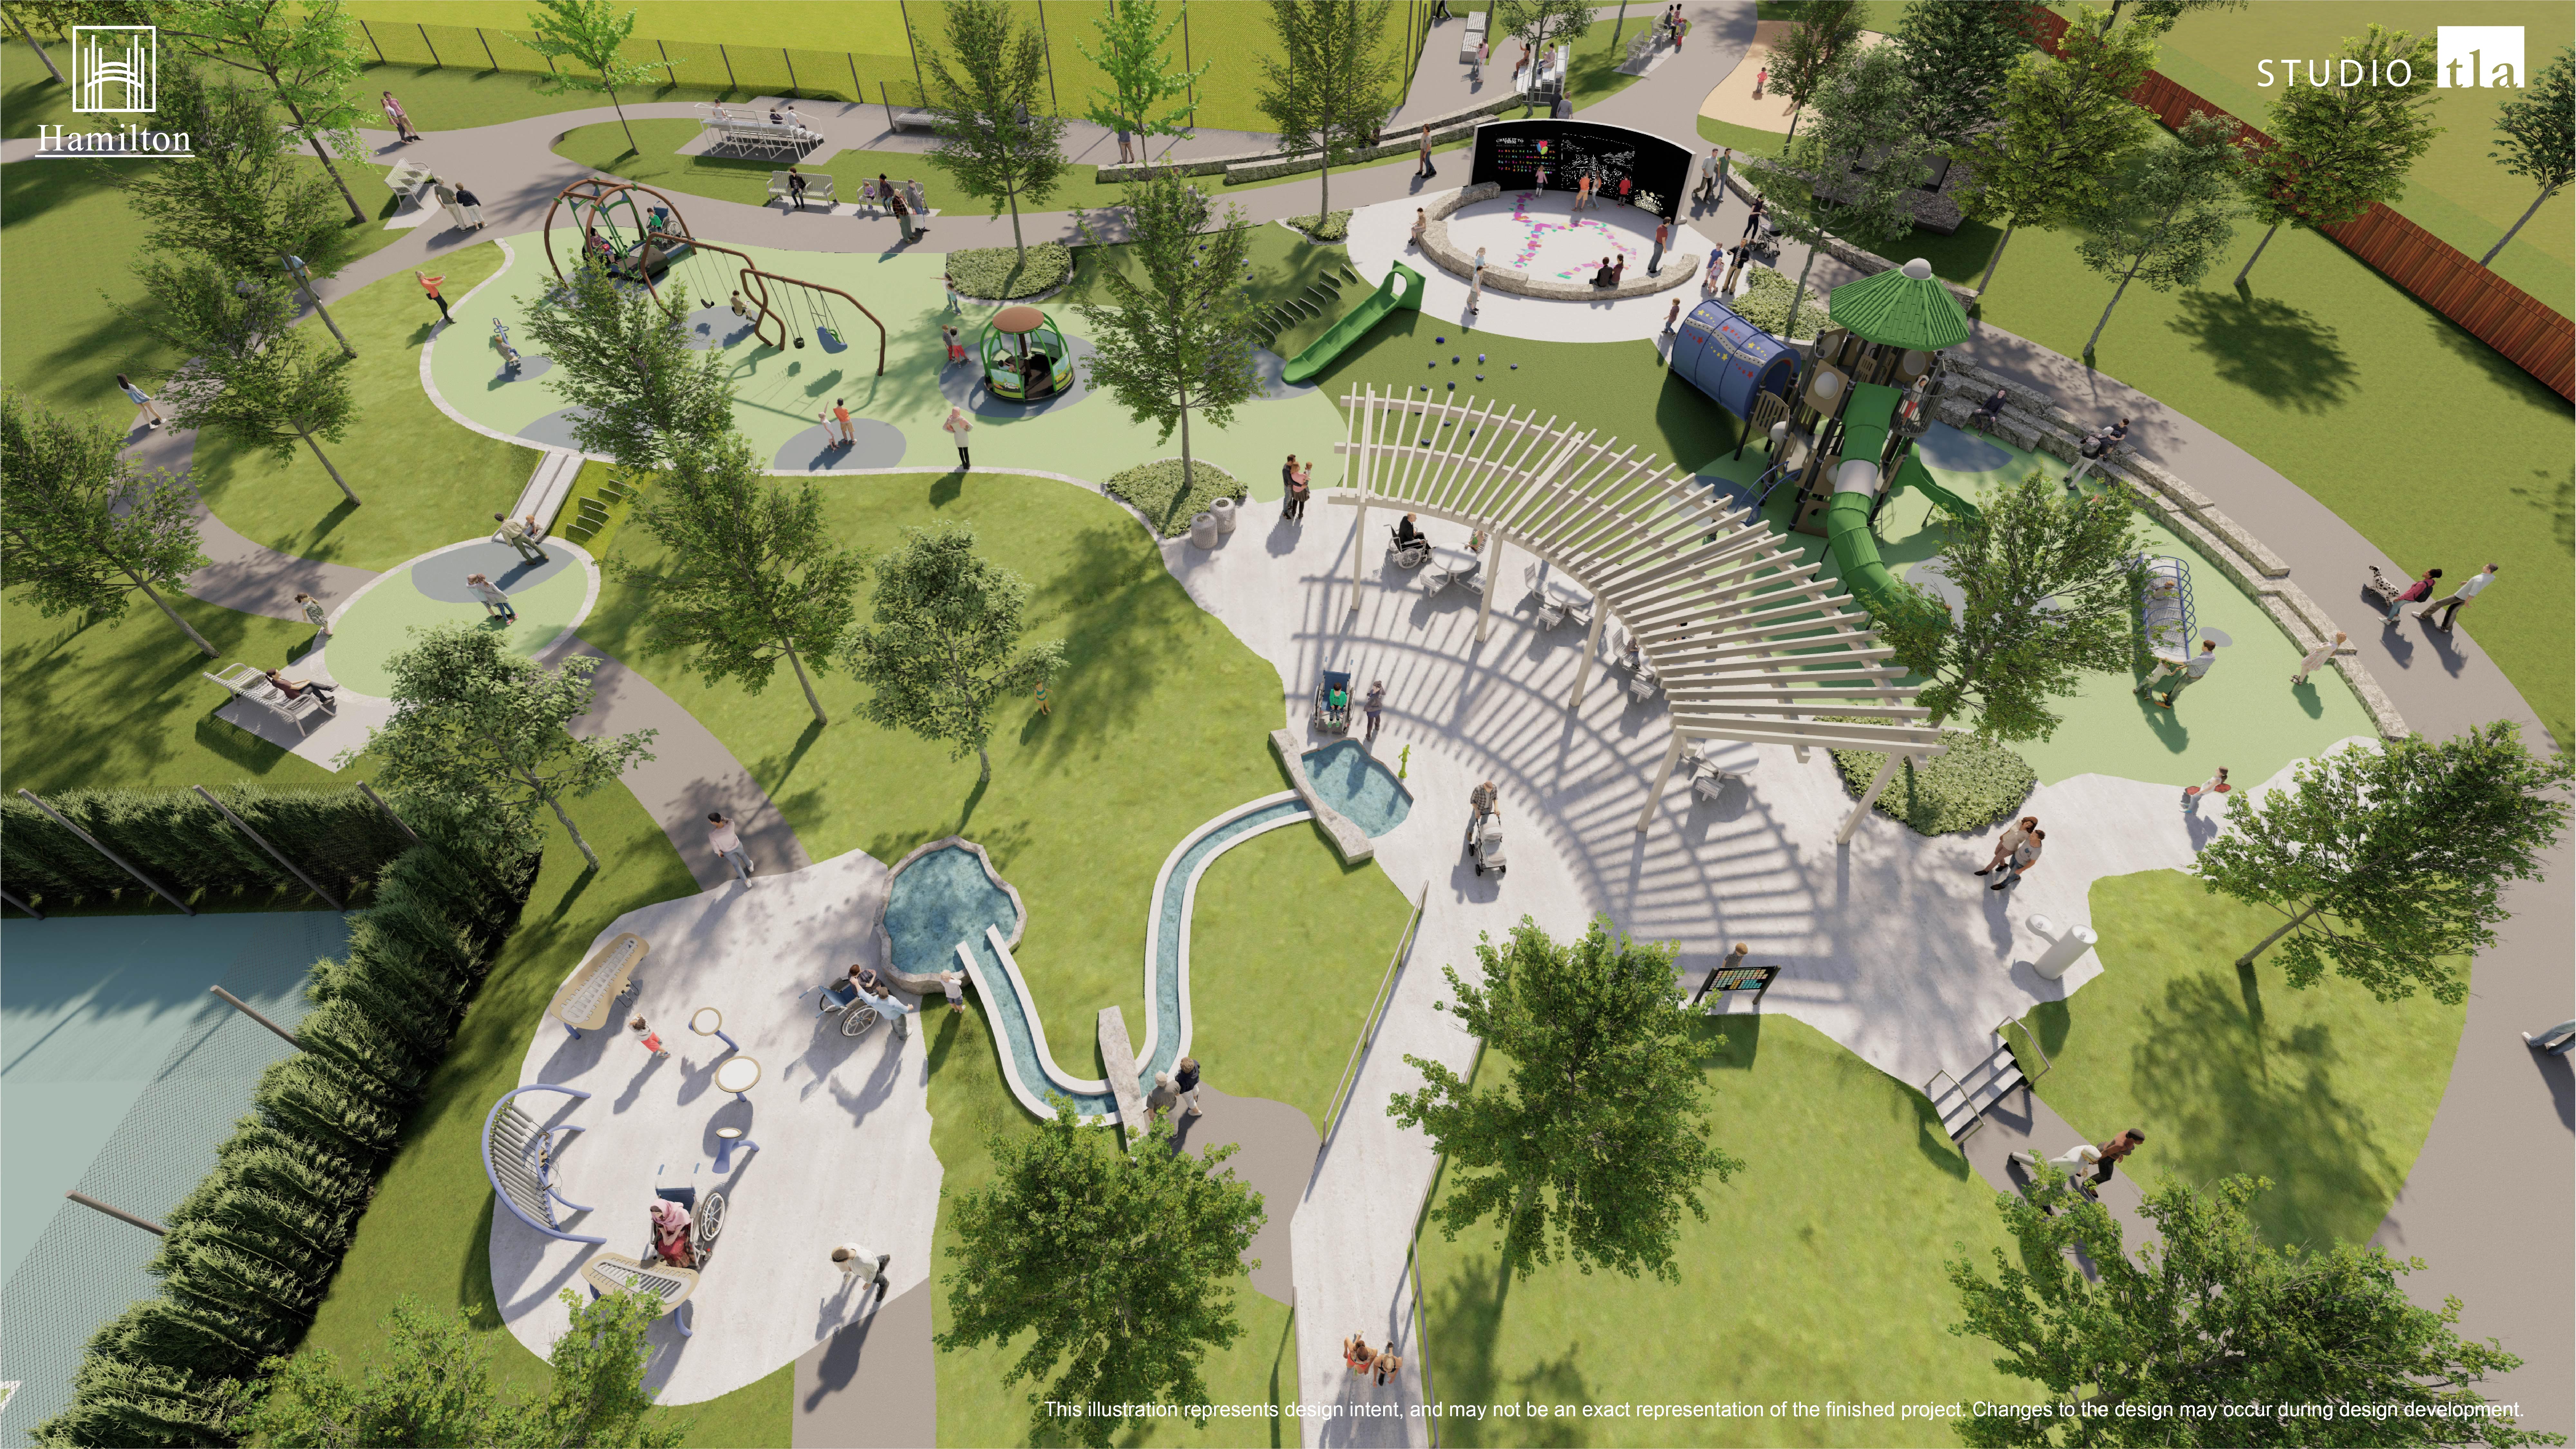 Inch Park Illustration 1: Bird's eye view of the inclusive play space